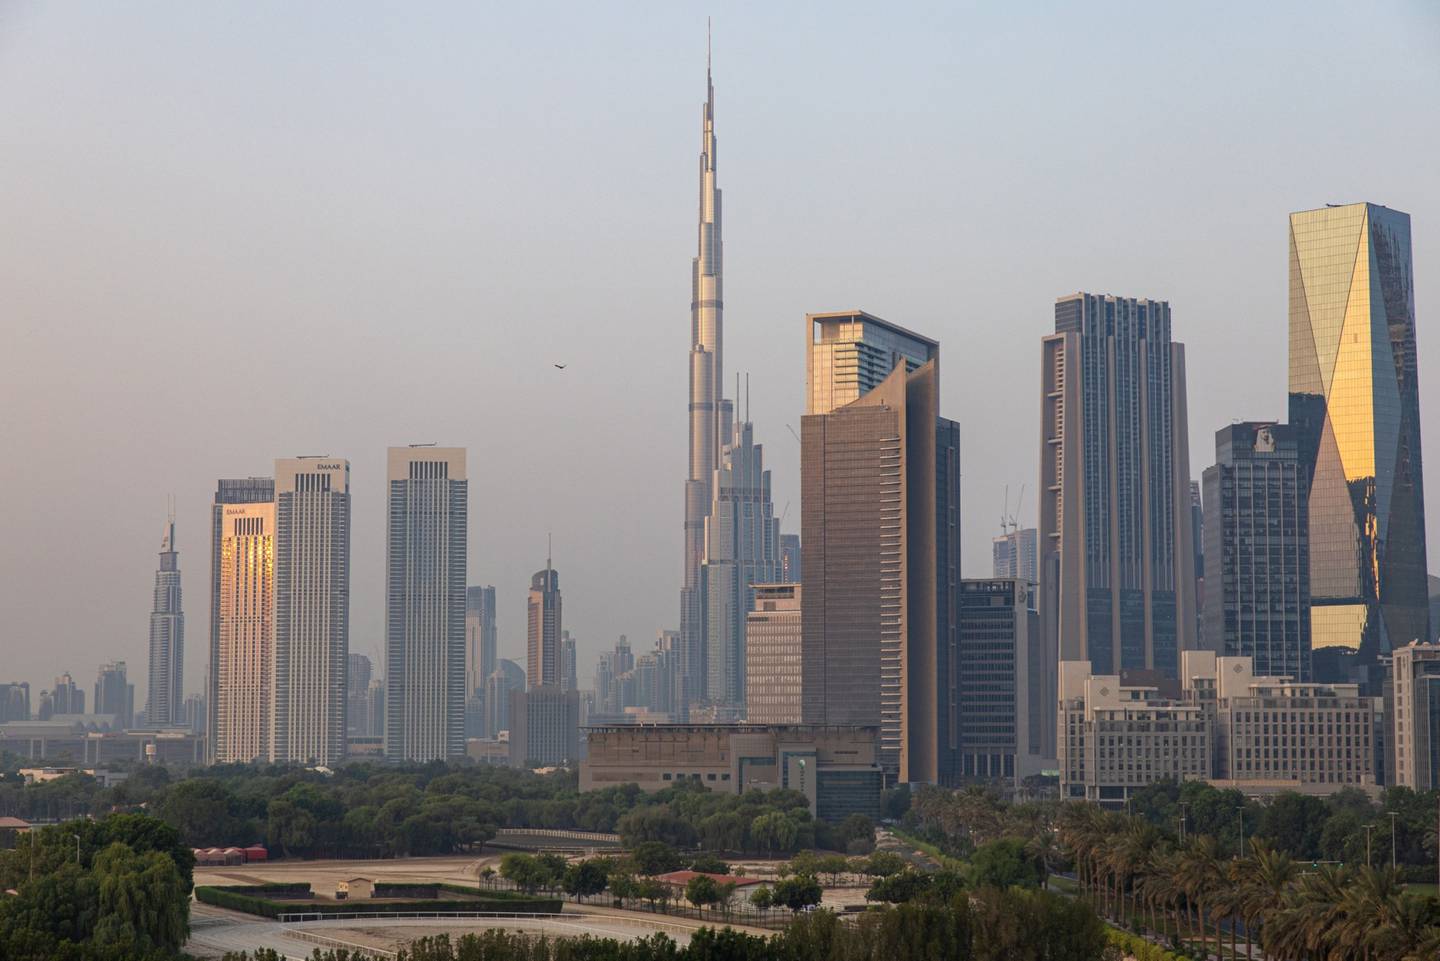 Burj Khalifa's international popularity has brought the Arabic for tower into the global lexicon. Photo: Bloomberg